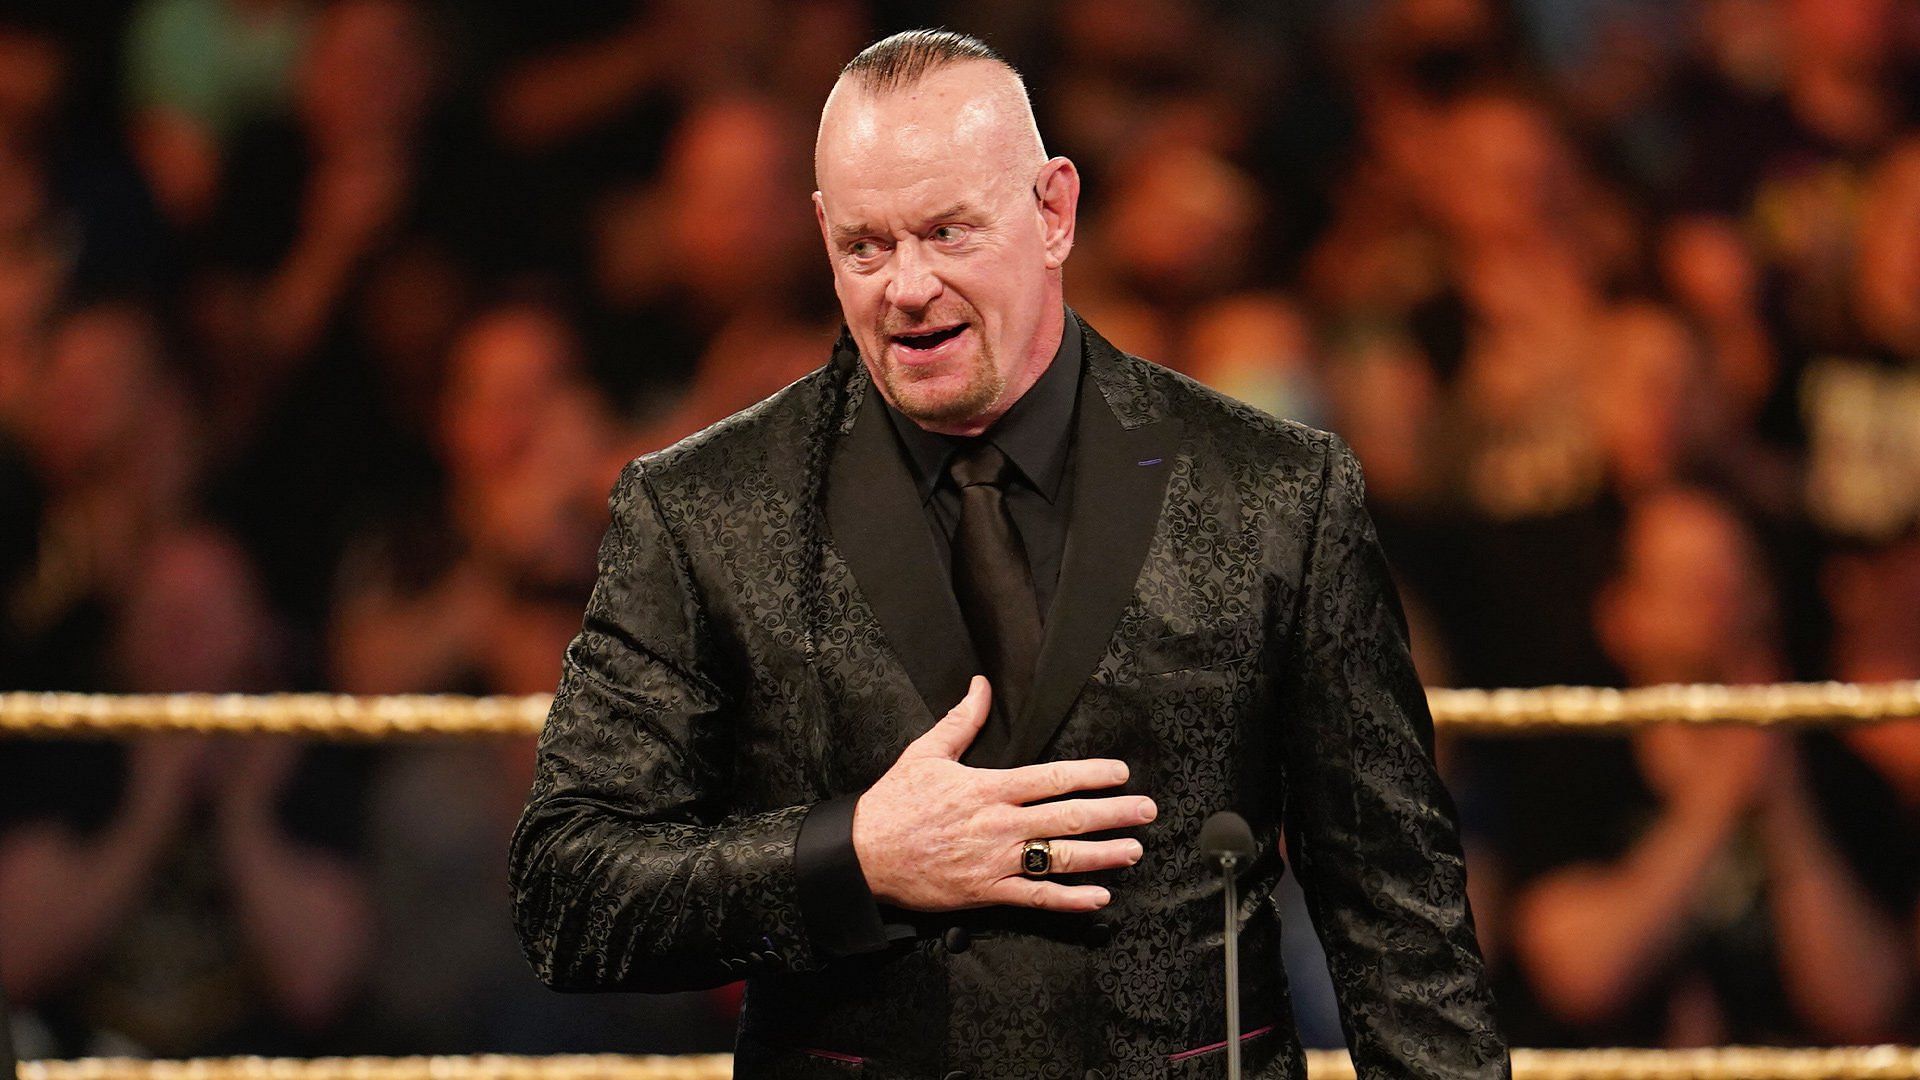 The Deadman has a storied and decorated career in WWE.